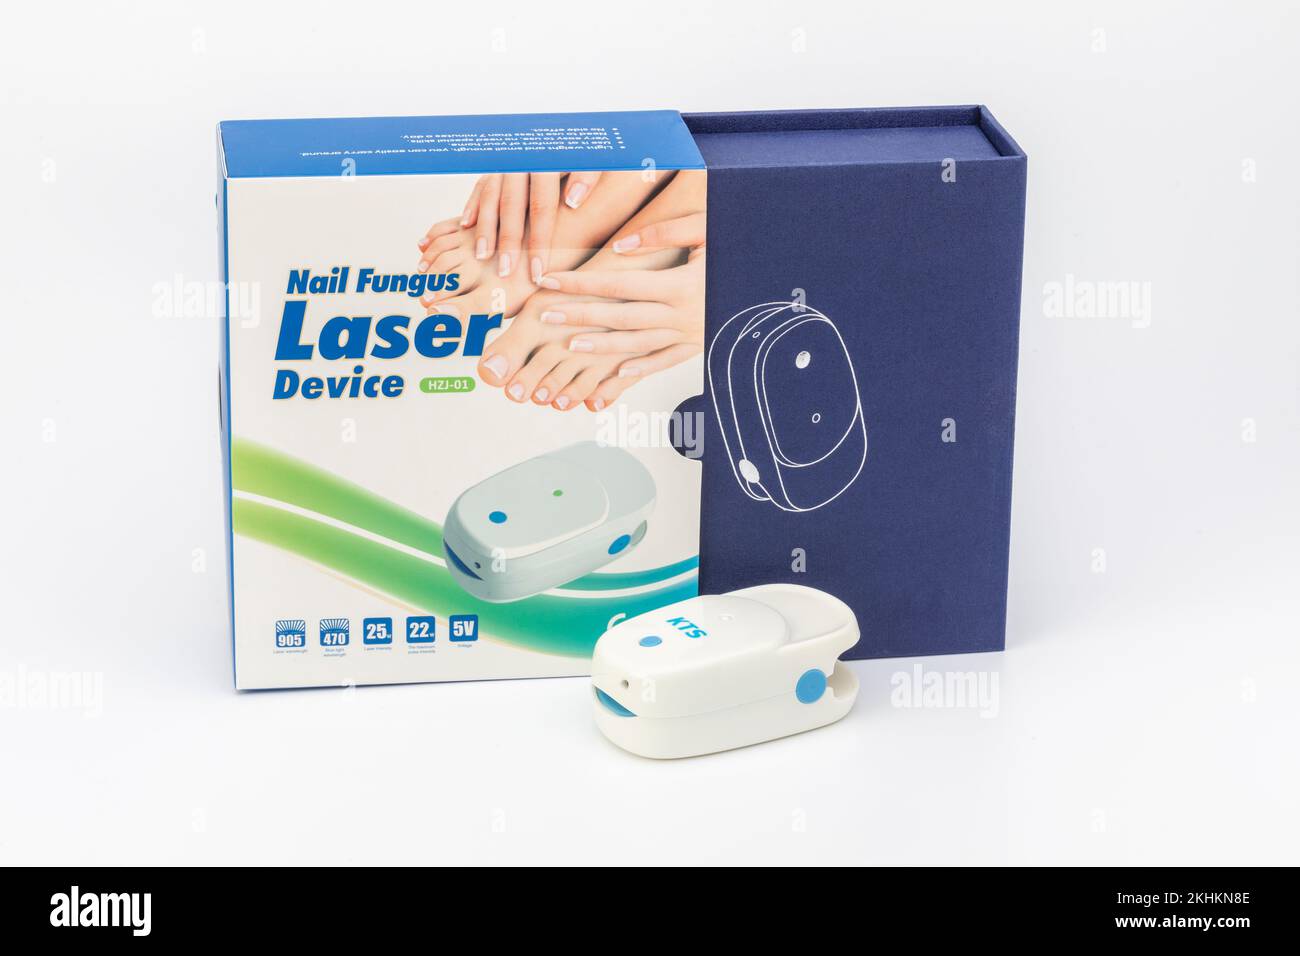 A CET product services Nail fungus laser device Stock Photo